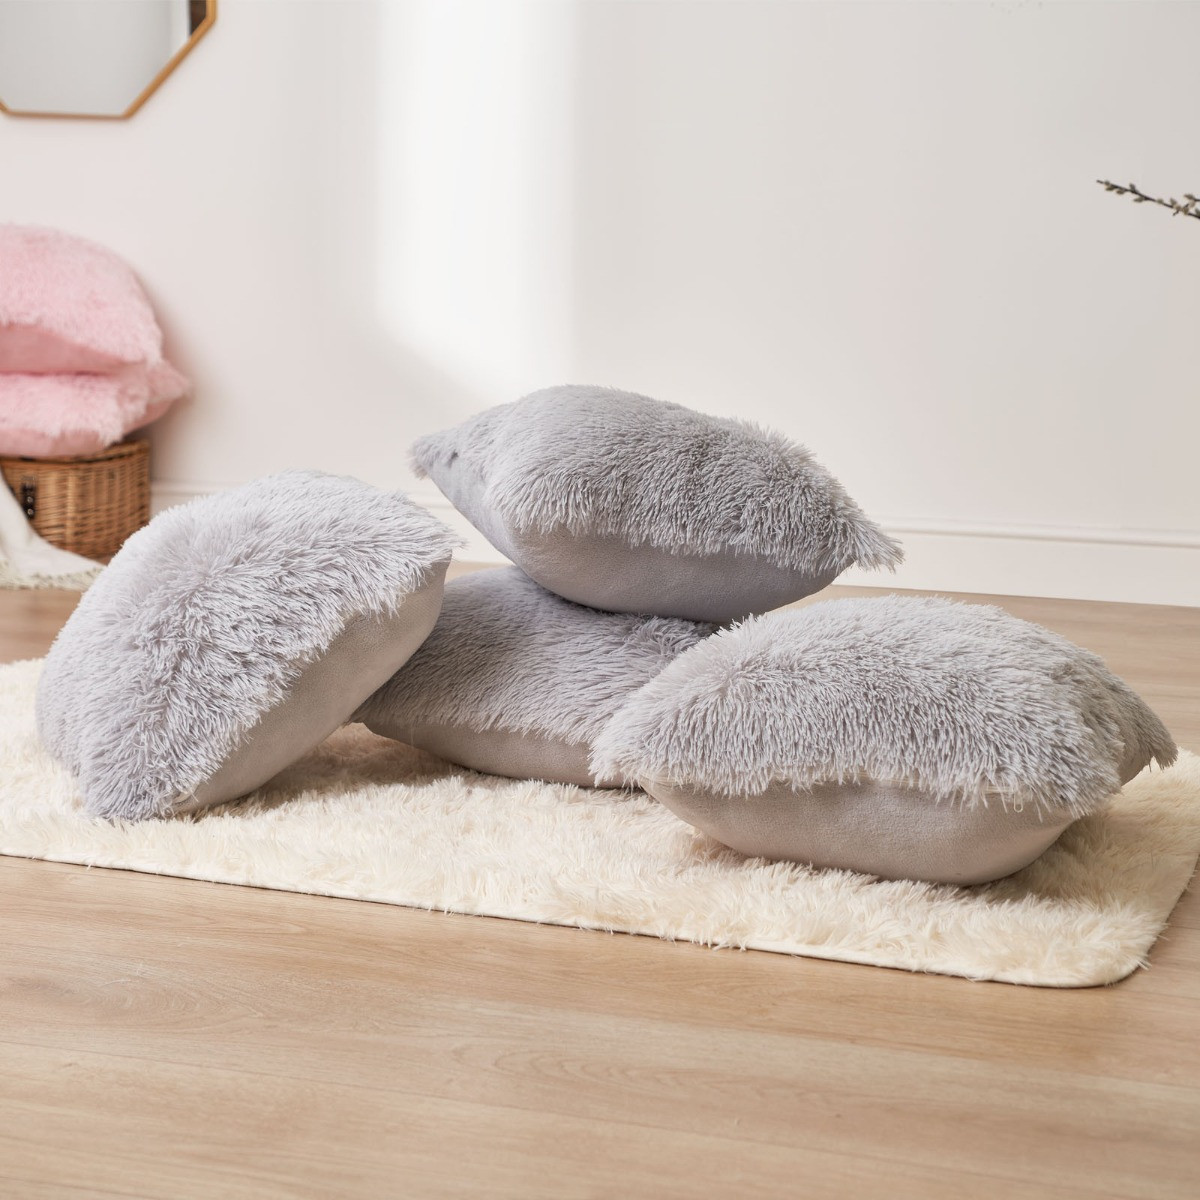 Sienna 4 Pack Fluffy Cushion Covers - Silver Grey>